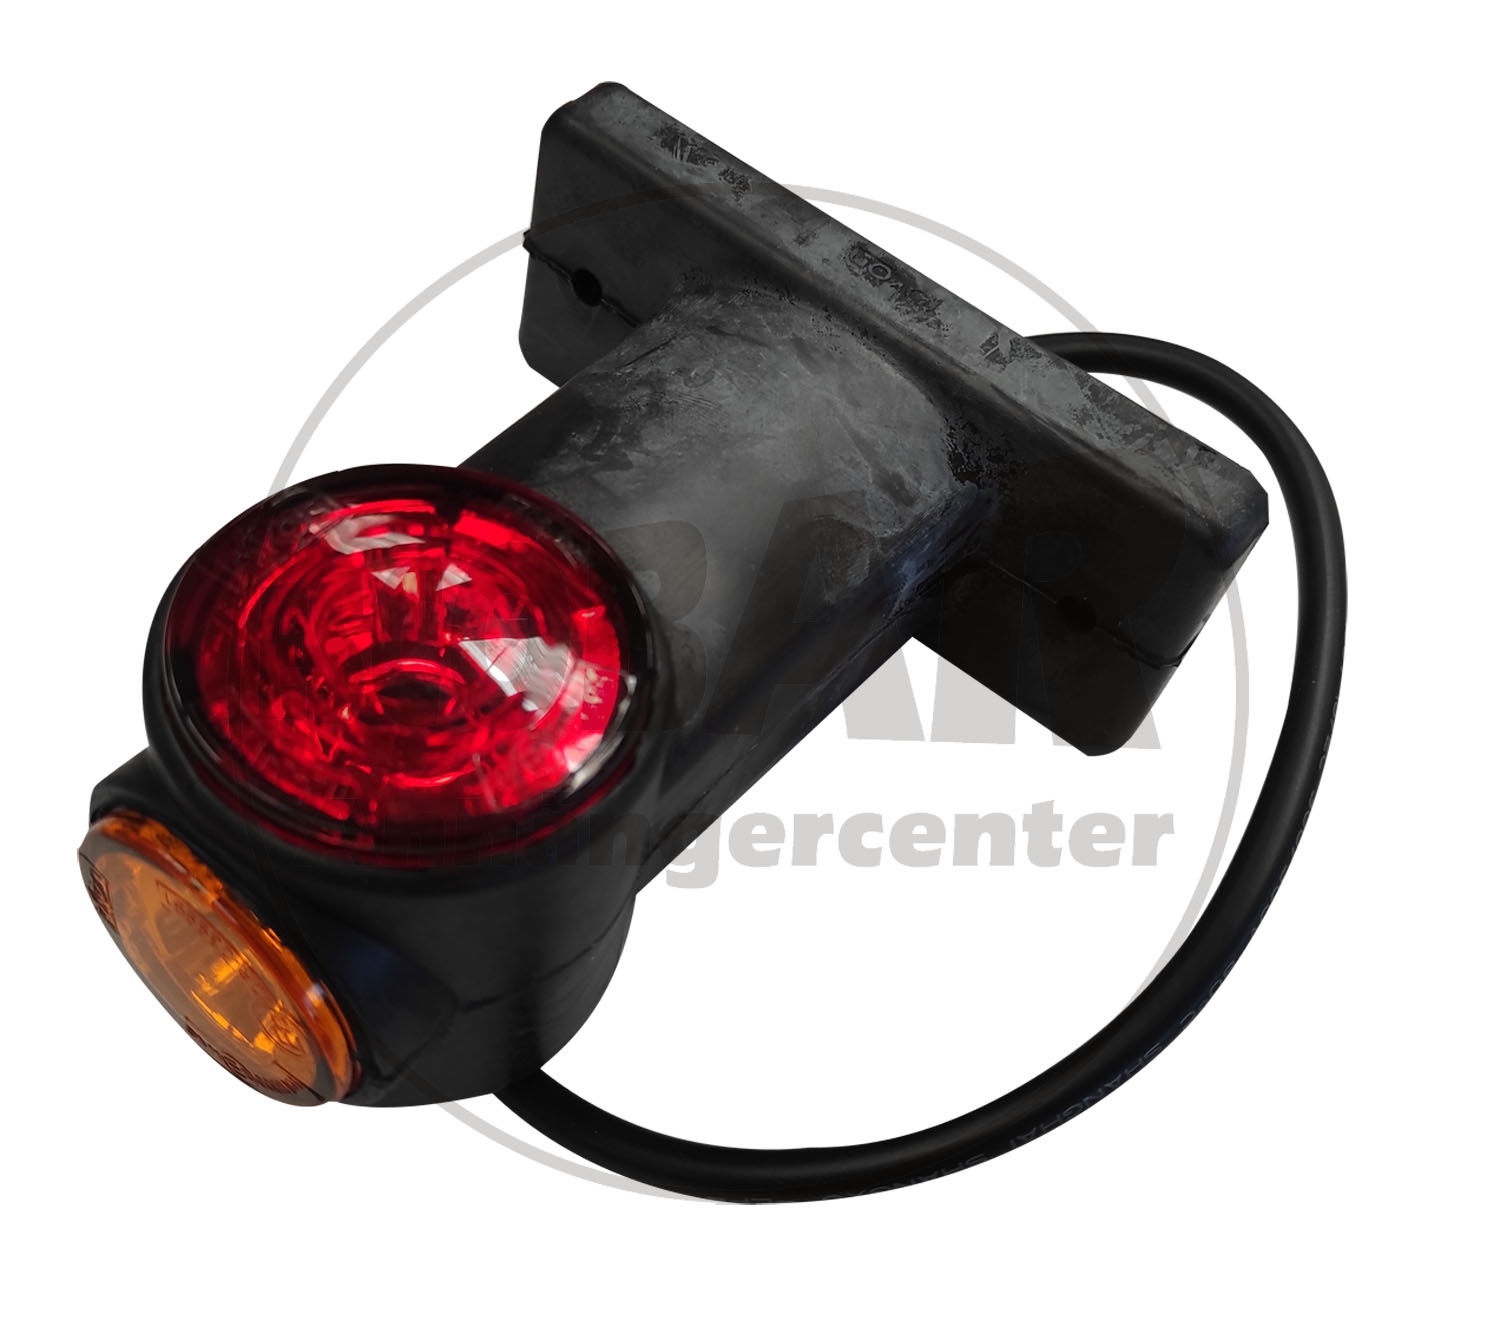 umrissleuchte led rot/weiss 12.0017.000 920722